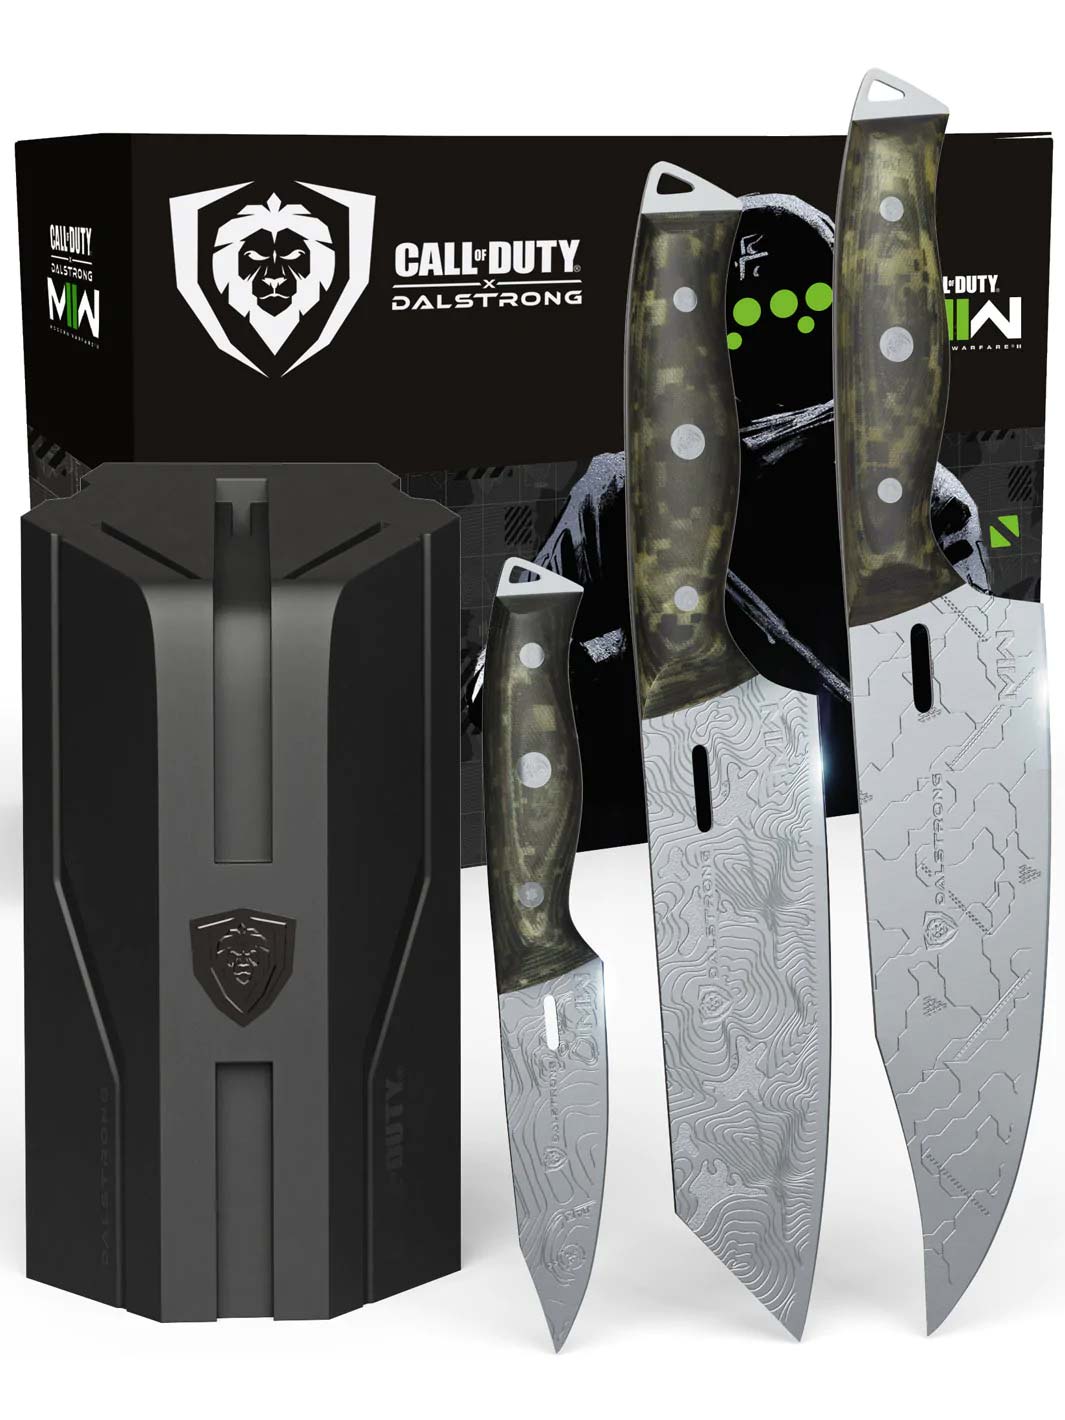 Dalstrong call of duty series 3 piece knife set with block in front of it's premium packaging.